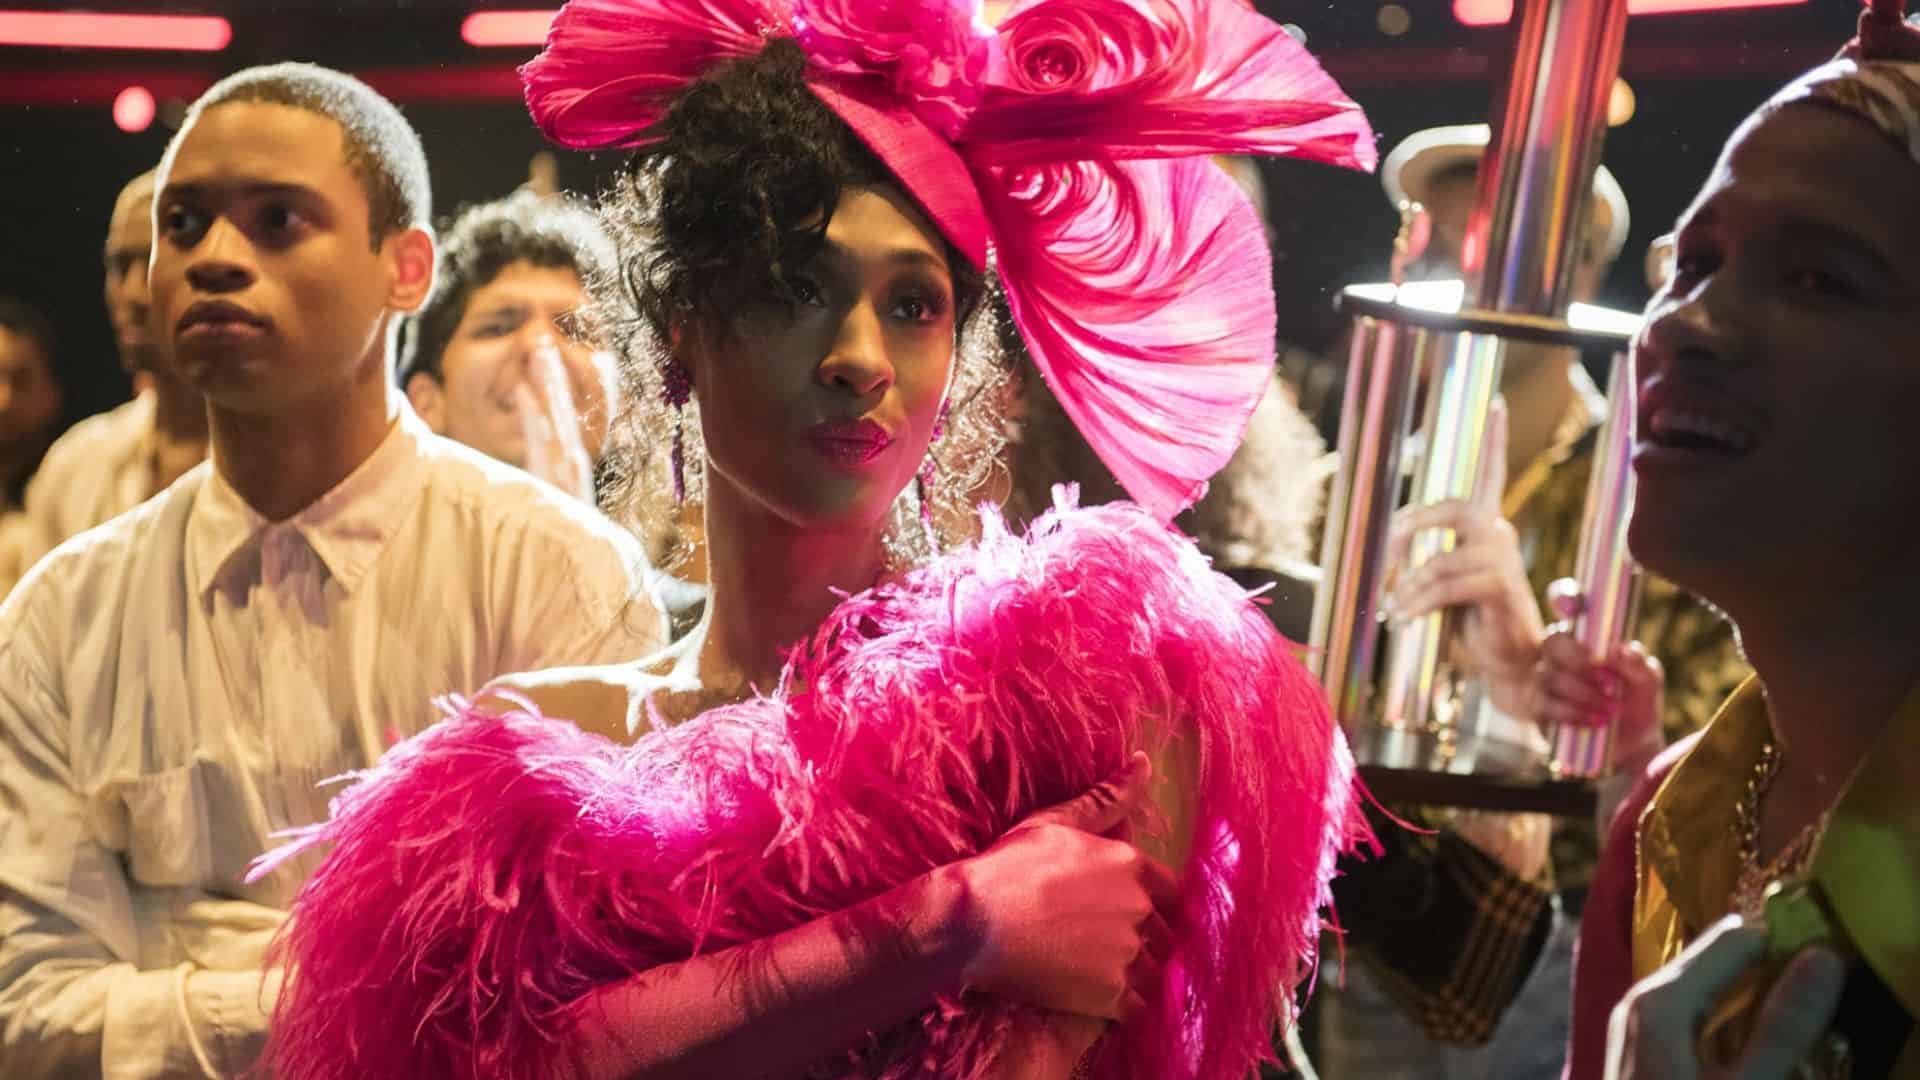 MJ Rodriguez in a pink dress and hat stands in a crowd in this image from FX Productions.